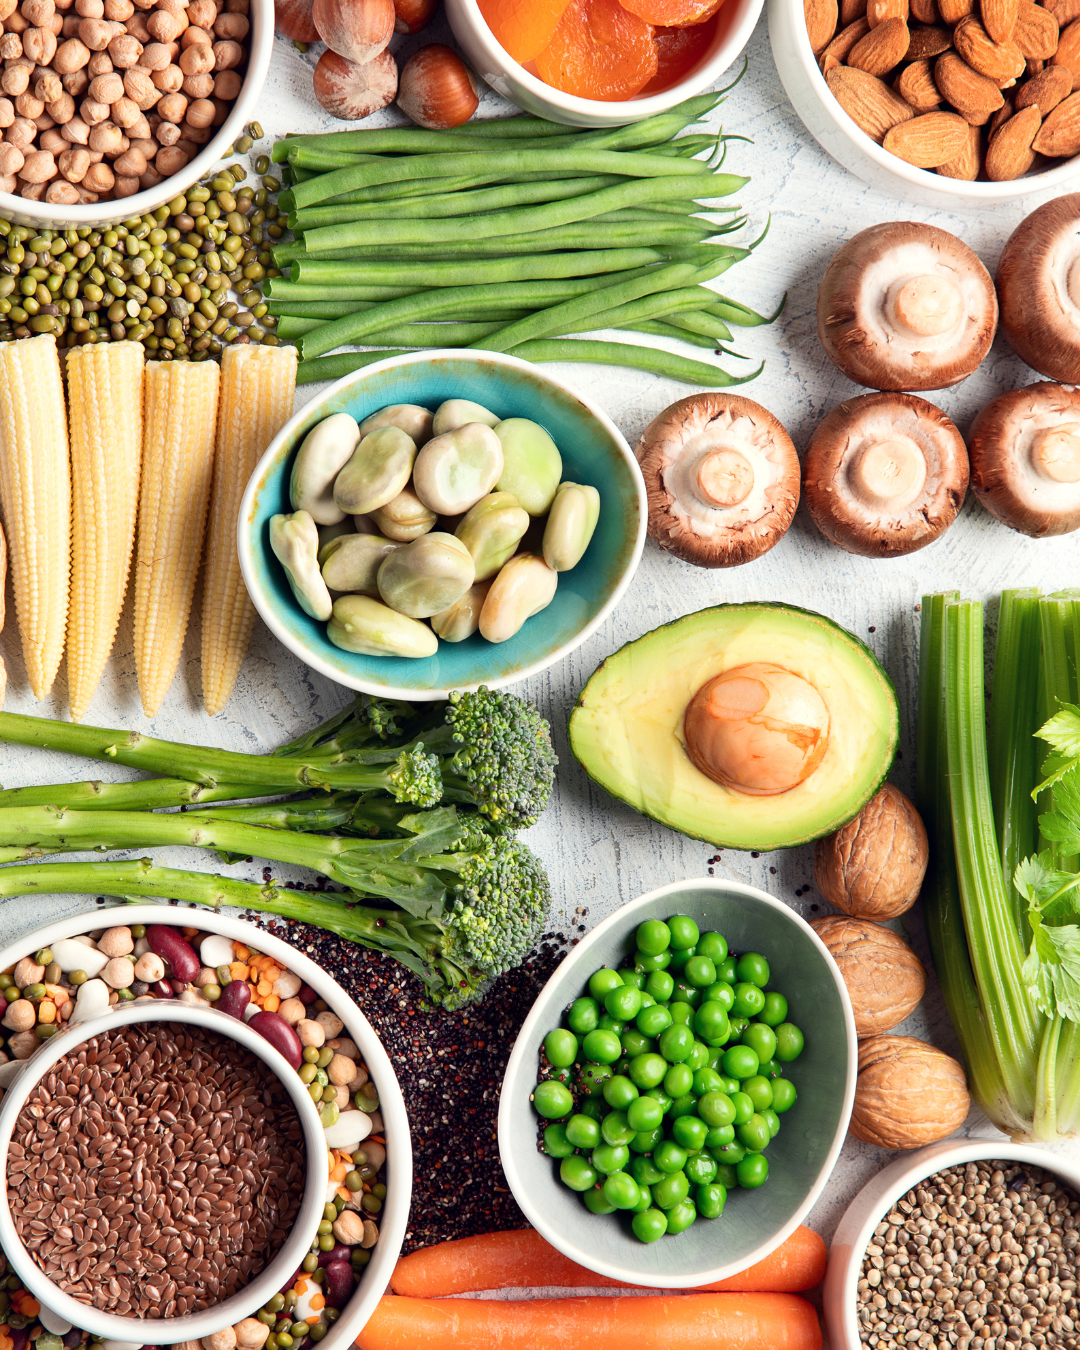 Plant-based foods that are good sources of plant based protein are laid on a table. Image includes avocados, lentils, broccolini, chickpeas, carrots, mushrooms and more.